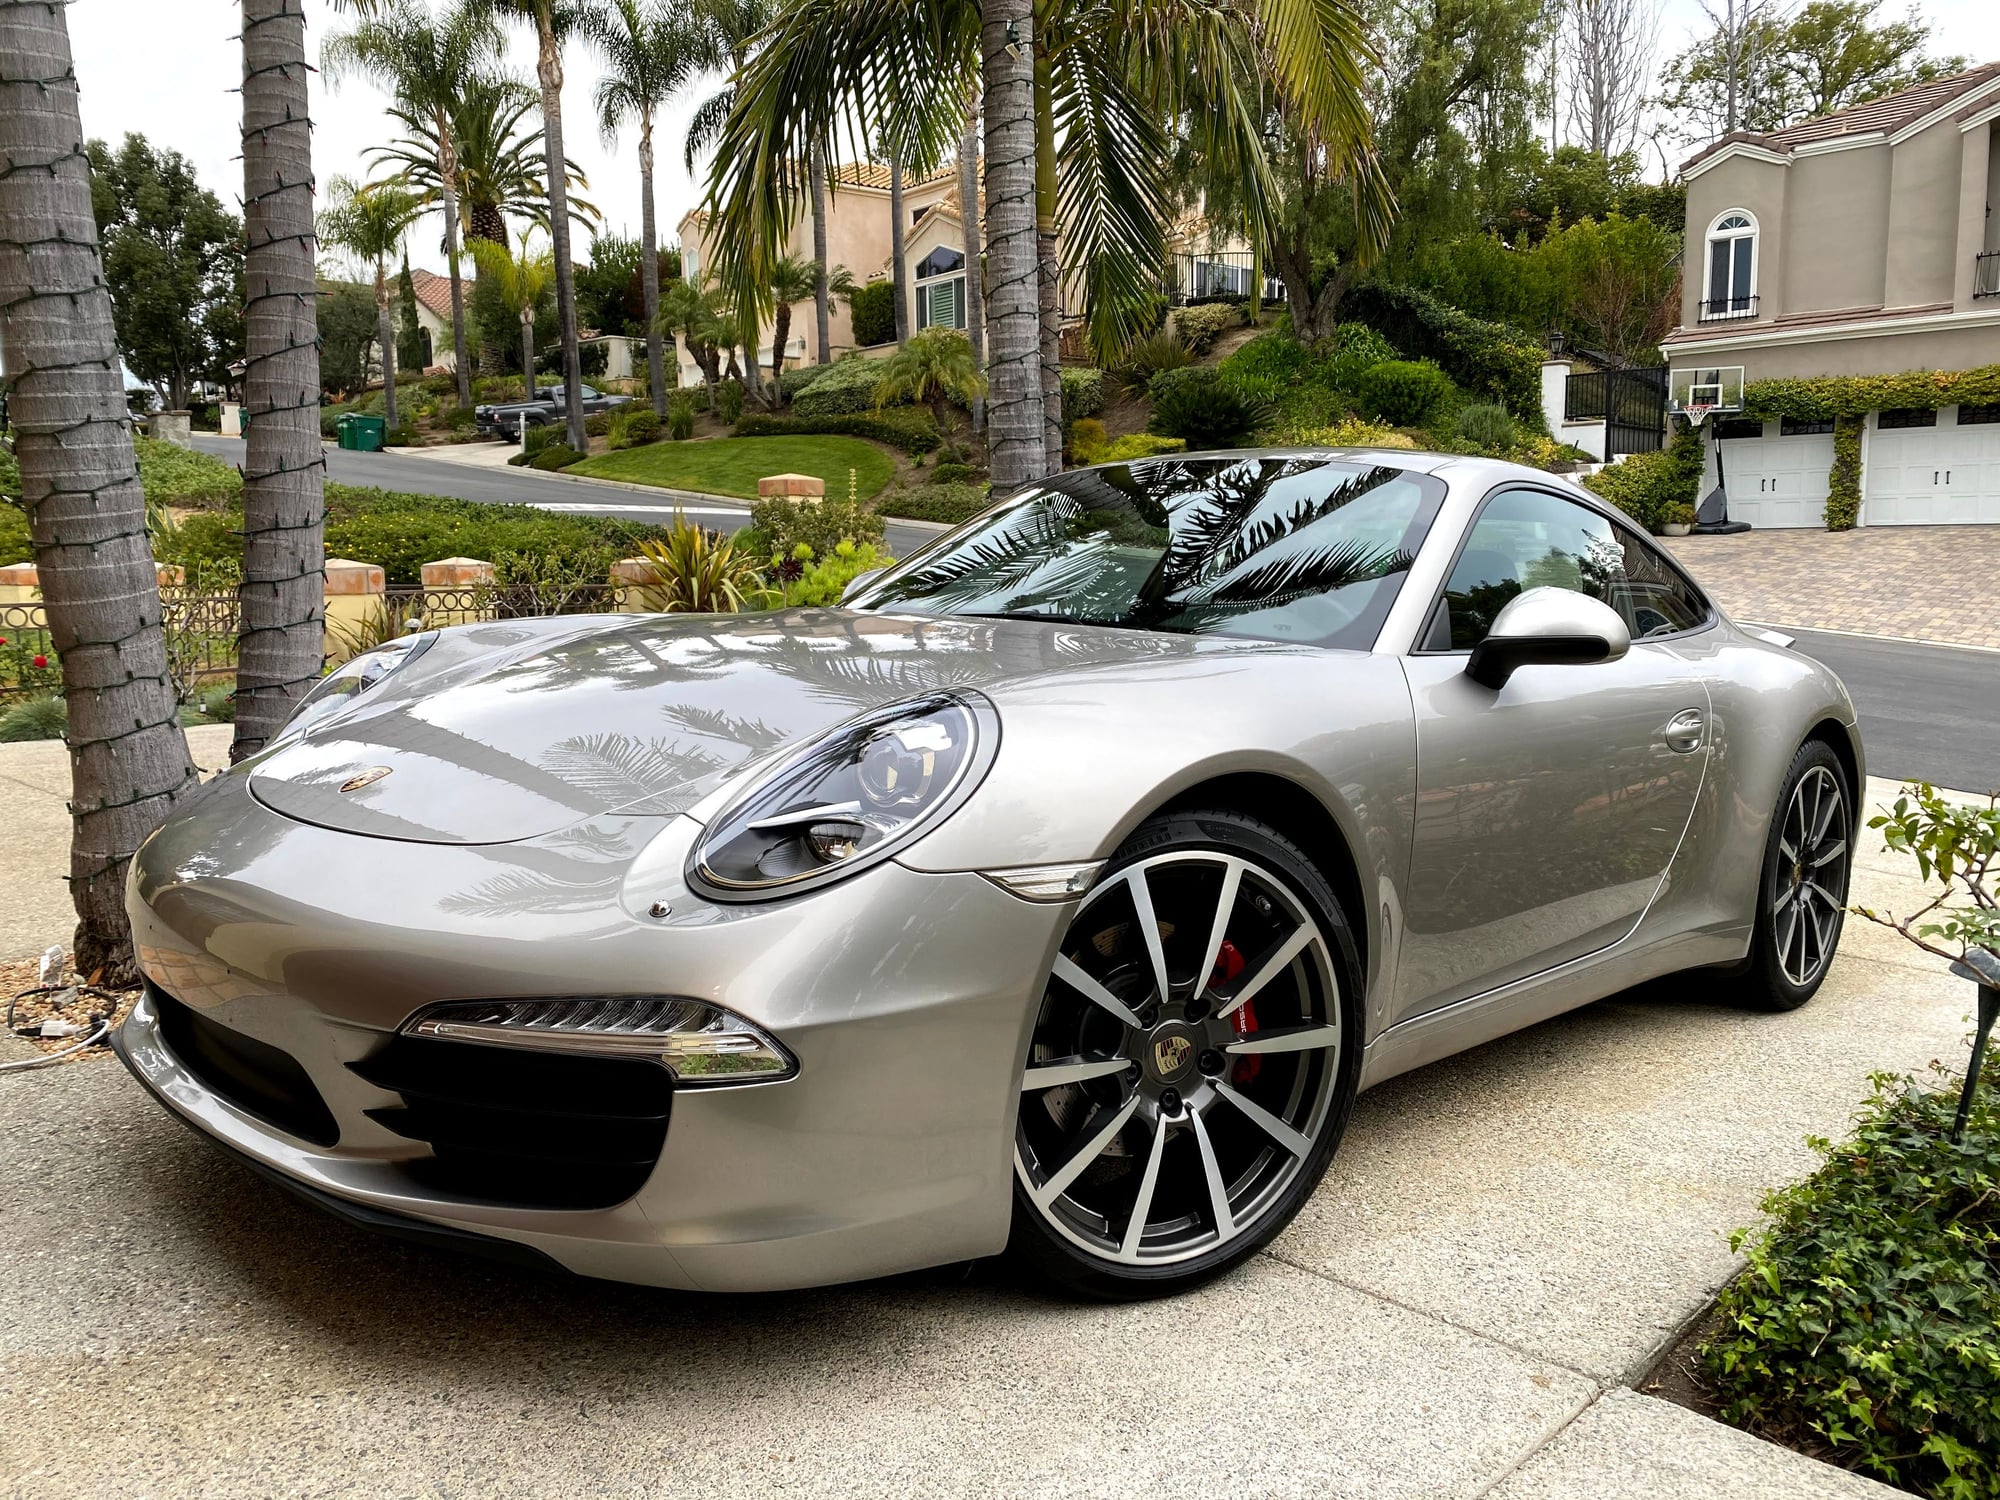 2013 Porsche 911 - 2013 Porsche 911 Carrera | 7-speed Manual | Silver | Coupe - Used - VIN WP0AA2A9XDS106640 - 74,500 Miles - 6 cyl - 2WD - Manual - Coupe - Silver - Los Angeles, CA 90014, United States